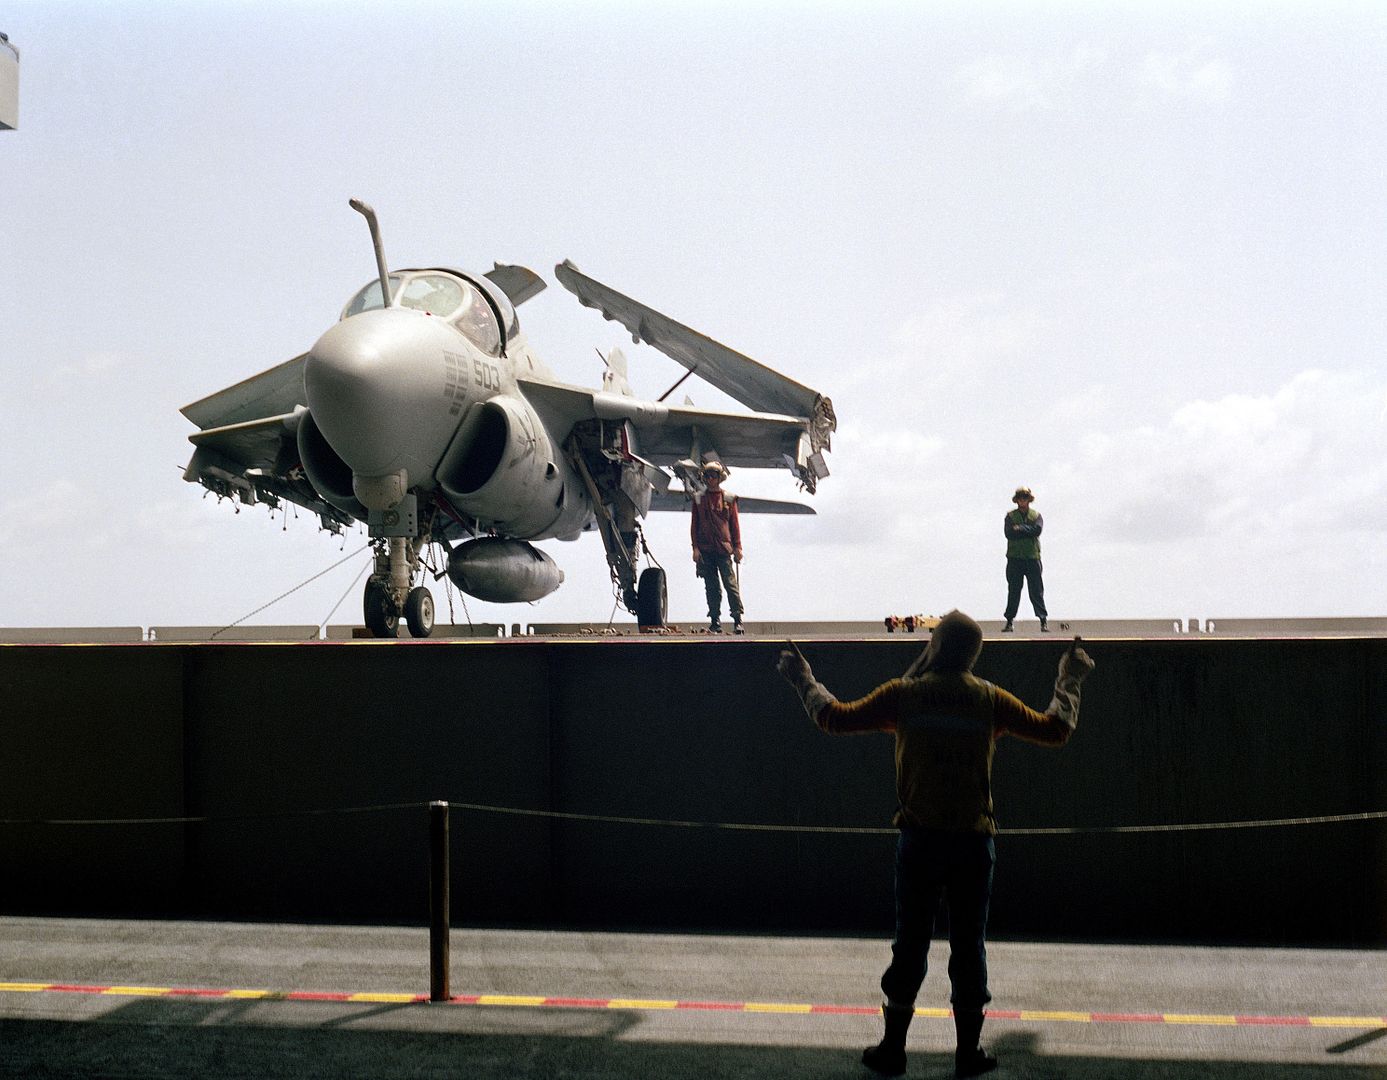 A Crew Member On An Elevator Signals To Flight Deck Crew Members As They Stand Beside As A 6E Intruder Aircraft During A General Quarters Drill Aboard The Aircraft Carrier USS KITTY HAWK